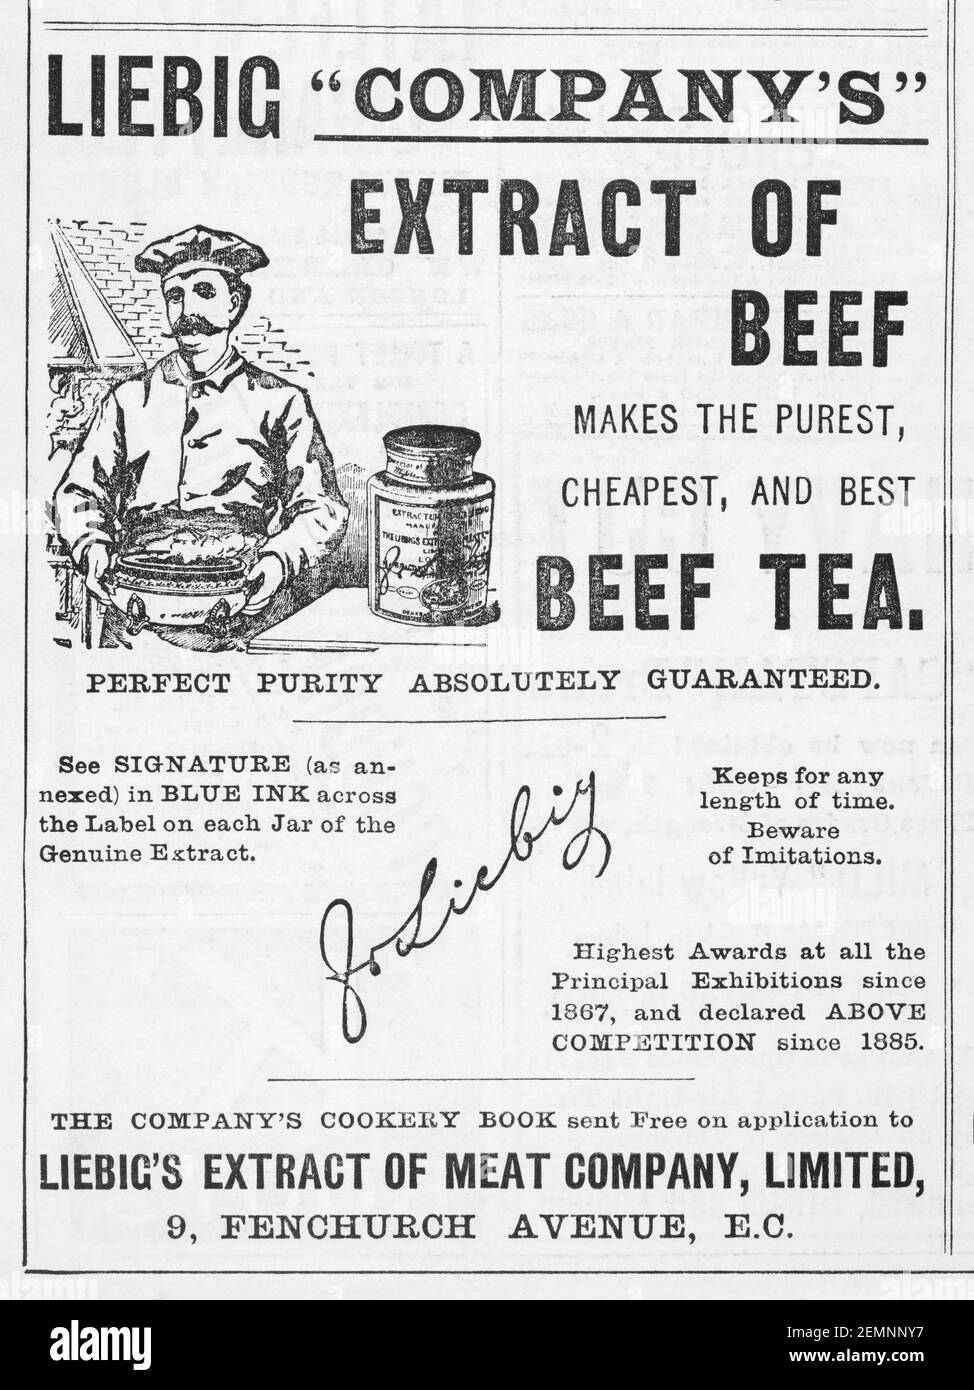 Old Victorian Liebig beef extract & beef tea advert from 1894 - before the dawn of advertising standards. History of advertising, old food adverts. Stock Photo